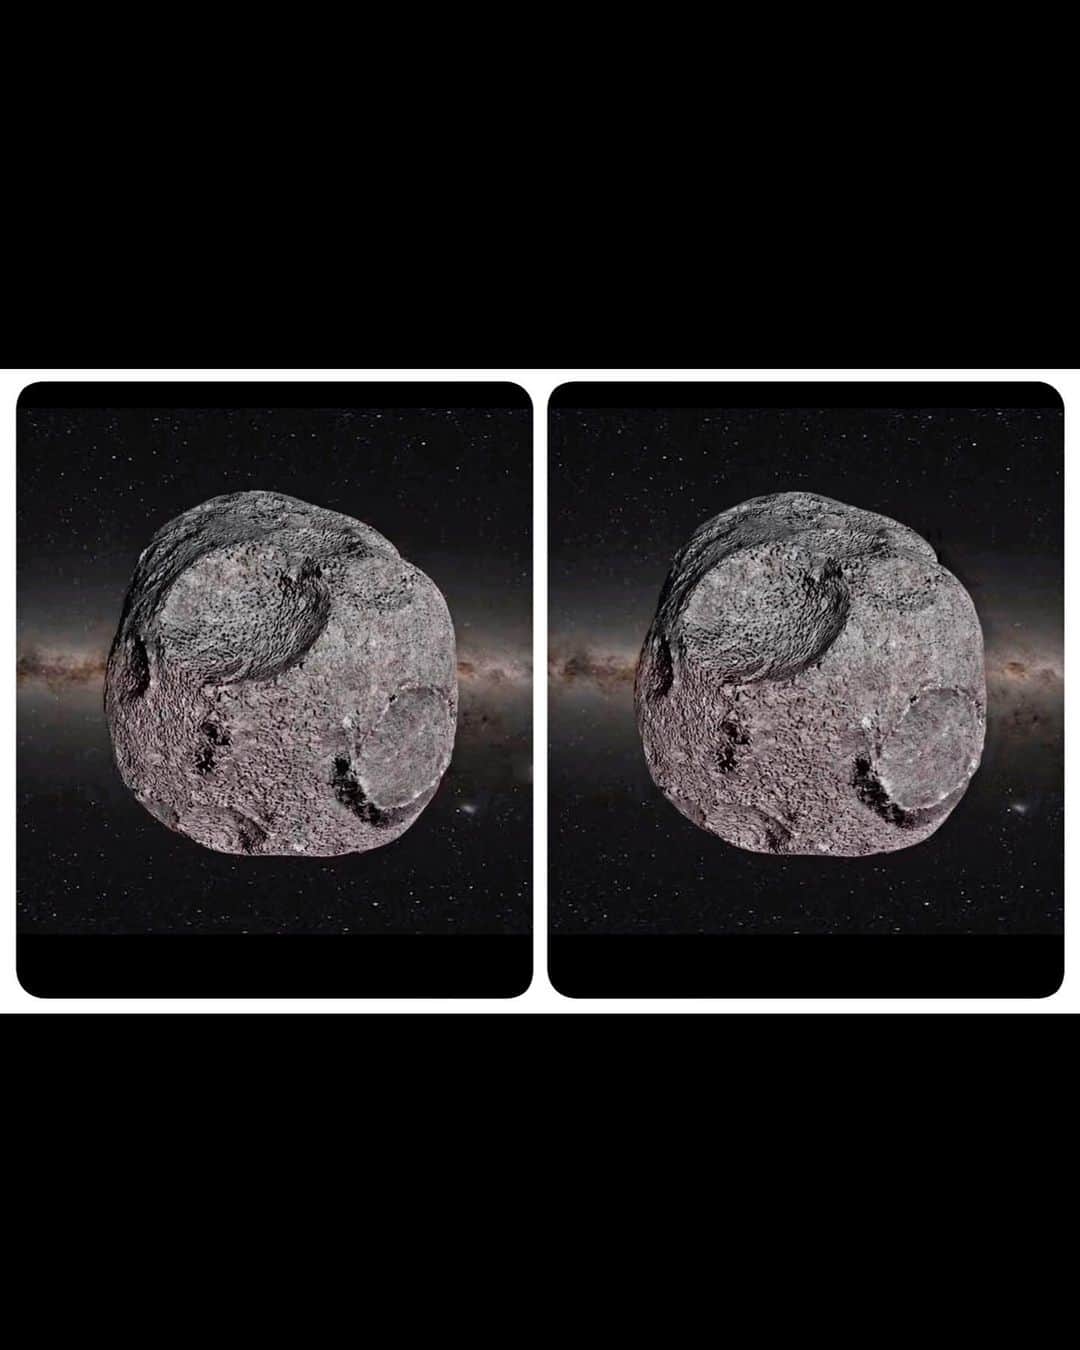 ブライアン・メイのインスタグラム：「DINKINESH !!!! As it might look ! Yesterday, November 1st, a new NASA mission chalked up its first success.  It completed a fly-by of a small asteroid called Dinkinesh.  The mission is called LUCY - named after a very early fossil human being found in Ethiopia in 1974, and named Lucy by the English-speaking world. Dinkinesh is the Ethiopian name given to this fossil, and to this small member of our Solar System. My astro stereo colleague Claudia Manzoni @lonely_whispers_  distilled this nice stereo of the way the NASA team think the asteroid MIGHT look, as animated on the LUCY website.  And I gave it a little polish ! Swipe for parallel or cross eyed views.  Then swipe again to see the first glimpse that the LUCY spacecraft captured of the asteroid a few months ago … seen as a faint point of light moving between exposures about 2 days apart (the asteroid flashes in the animation with a circle placed around it for easy location).   The flyby happened yesterday afternoon and the news is that it was a success and all the desired data were acquired.  But it will take some days for the LUCY craft to beam the data back down to Earth. The intriguing question is … how will the actual appearance of DINKINESH compare with this artist’s impression ? We’ll be waiting with bated breath - and I’d love to think we’ll be looking at a REAL stereo of this asteroid in a few days time. (💥 Correction) It’s about HALF a mile) across -  a bit bigger than Bennu, a bit smaller than Ryugu.  But will it turn out to be a solid body like we see here, or a rubble pile like Bennu and Ryugu ? It’s worth noting that this asteroid is NOT in a near-Earth orbit, but resides in an orbit between that of Mars and Jupiter - in the so-called MAIN BELT of asteroids.  How intriguing !!!! Credit : NASA/Goddard/SwRI/Johns Hopkins APL/ Claudia Manzoni/Brian May for the stereos.  Bri」